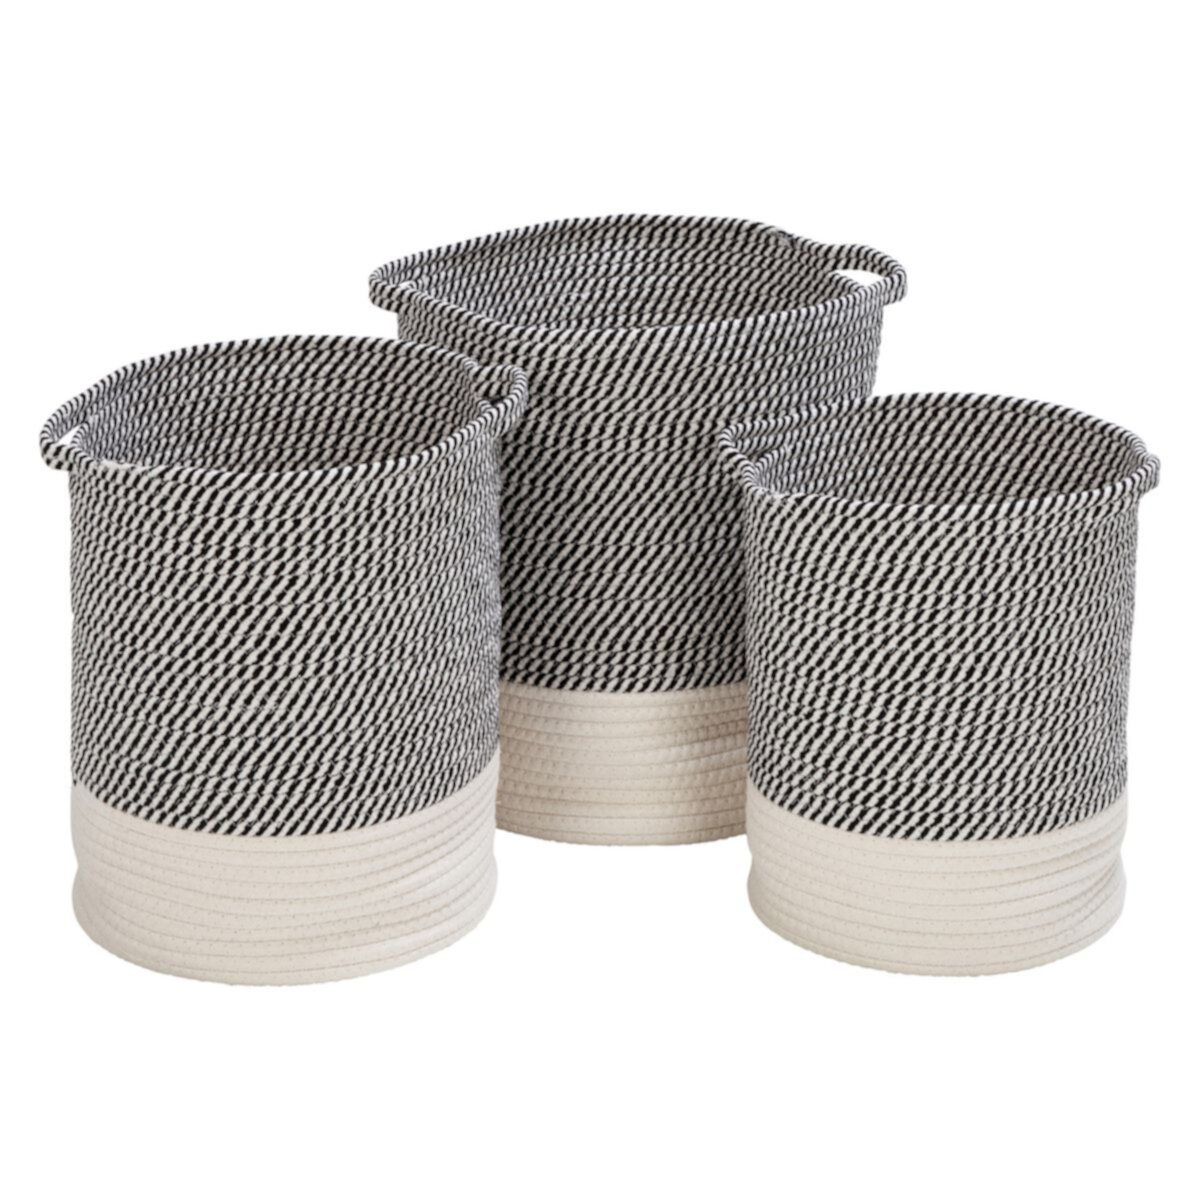 Honey-Can-Do Two-Tone Cotton Rope 3-Piece Storage Basket Set Honey-Can-Do